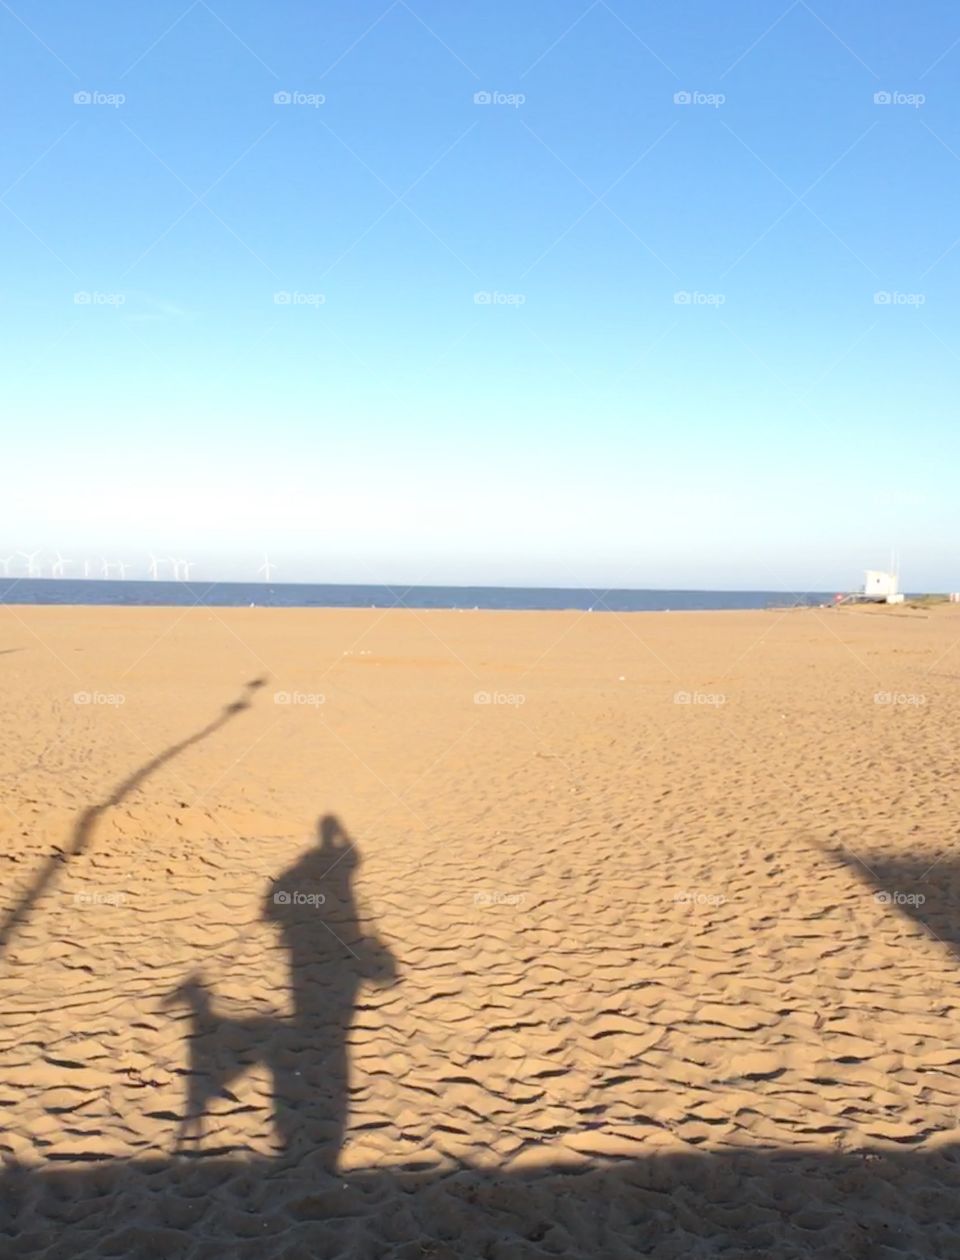 Skegness beach just before sunset with lady and whippet silhouette shadow and wind farm on the horizon 